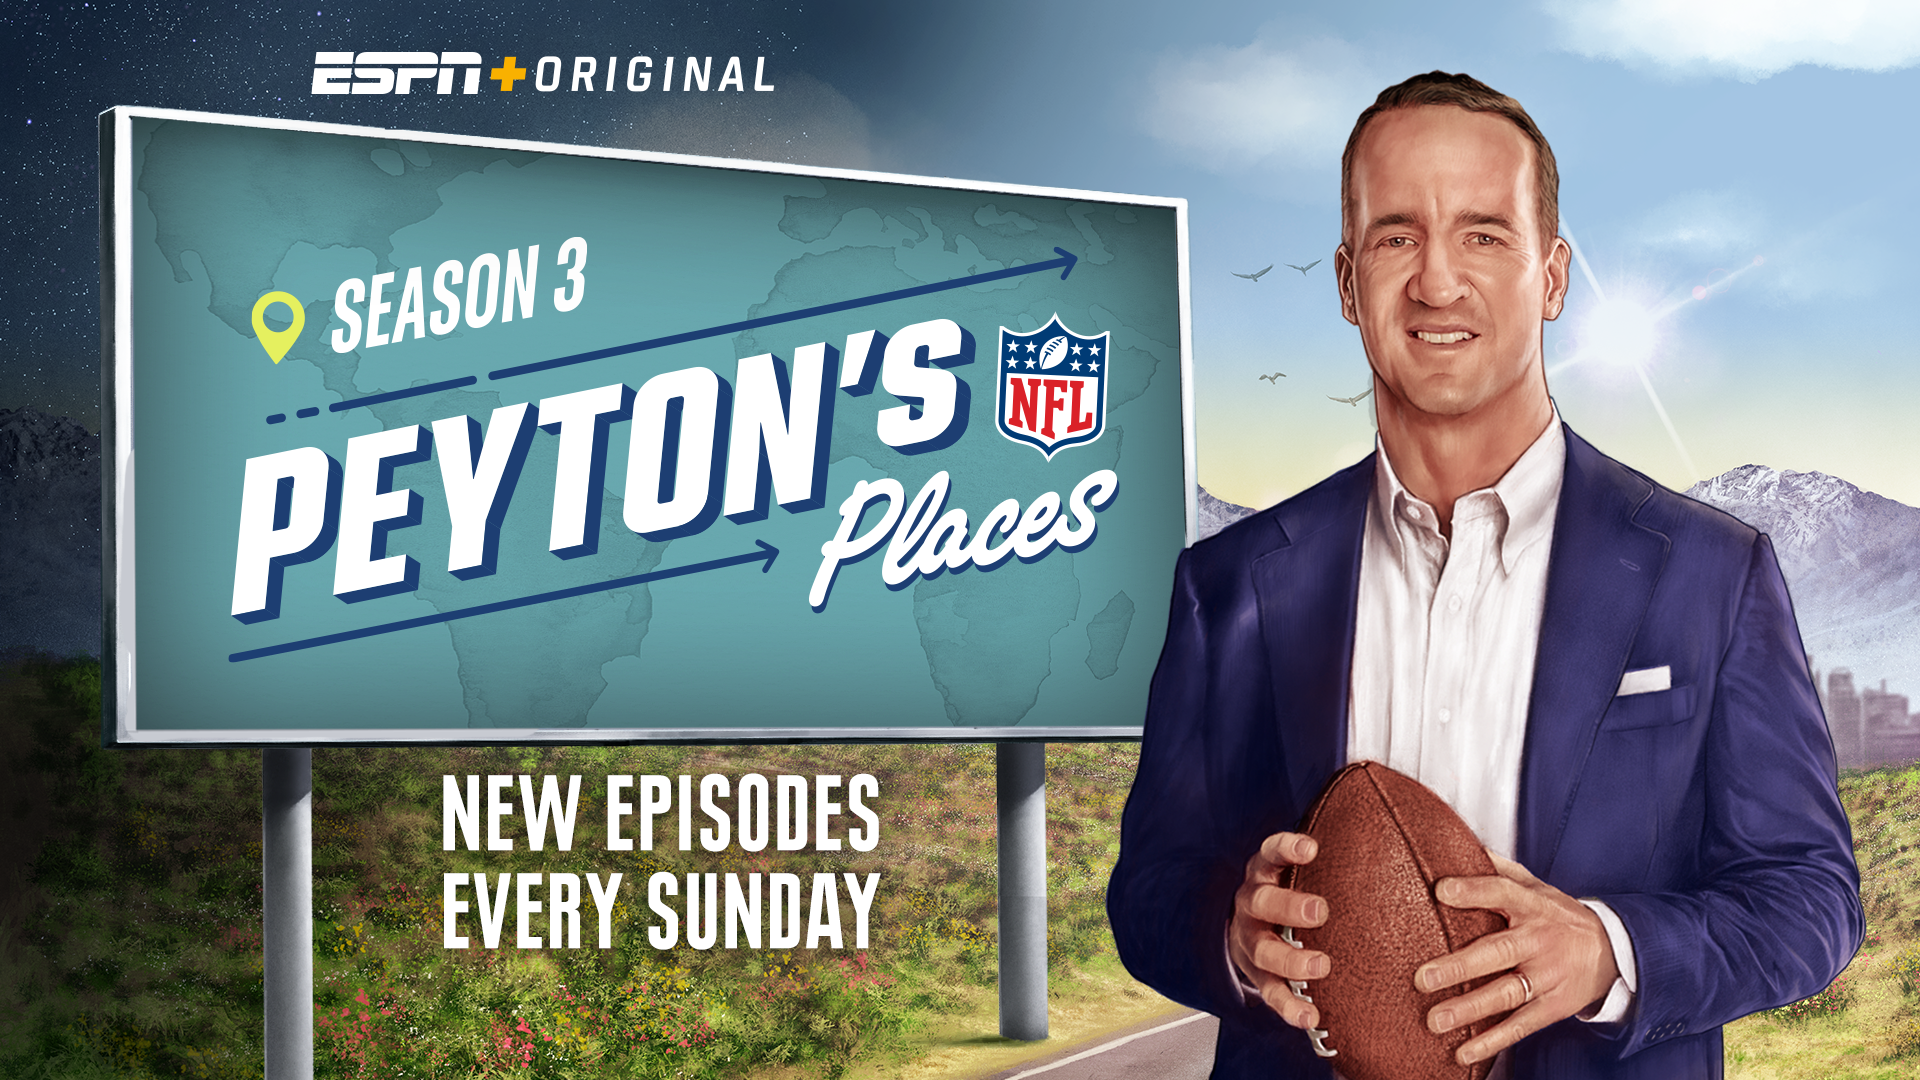 A graphic showing the logo of "Peyton's Place."